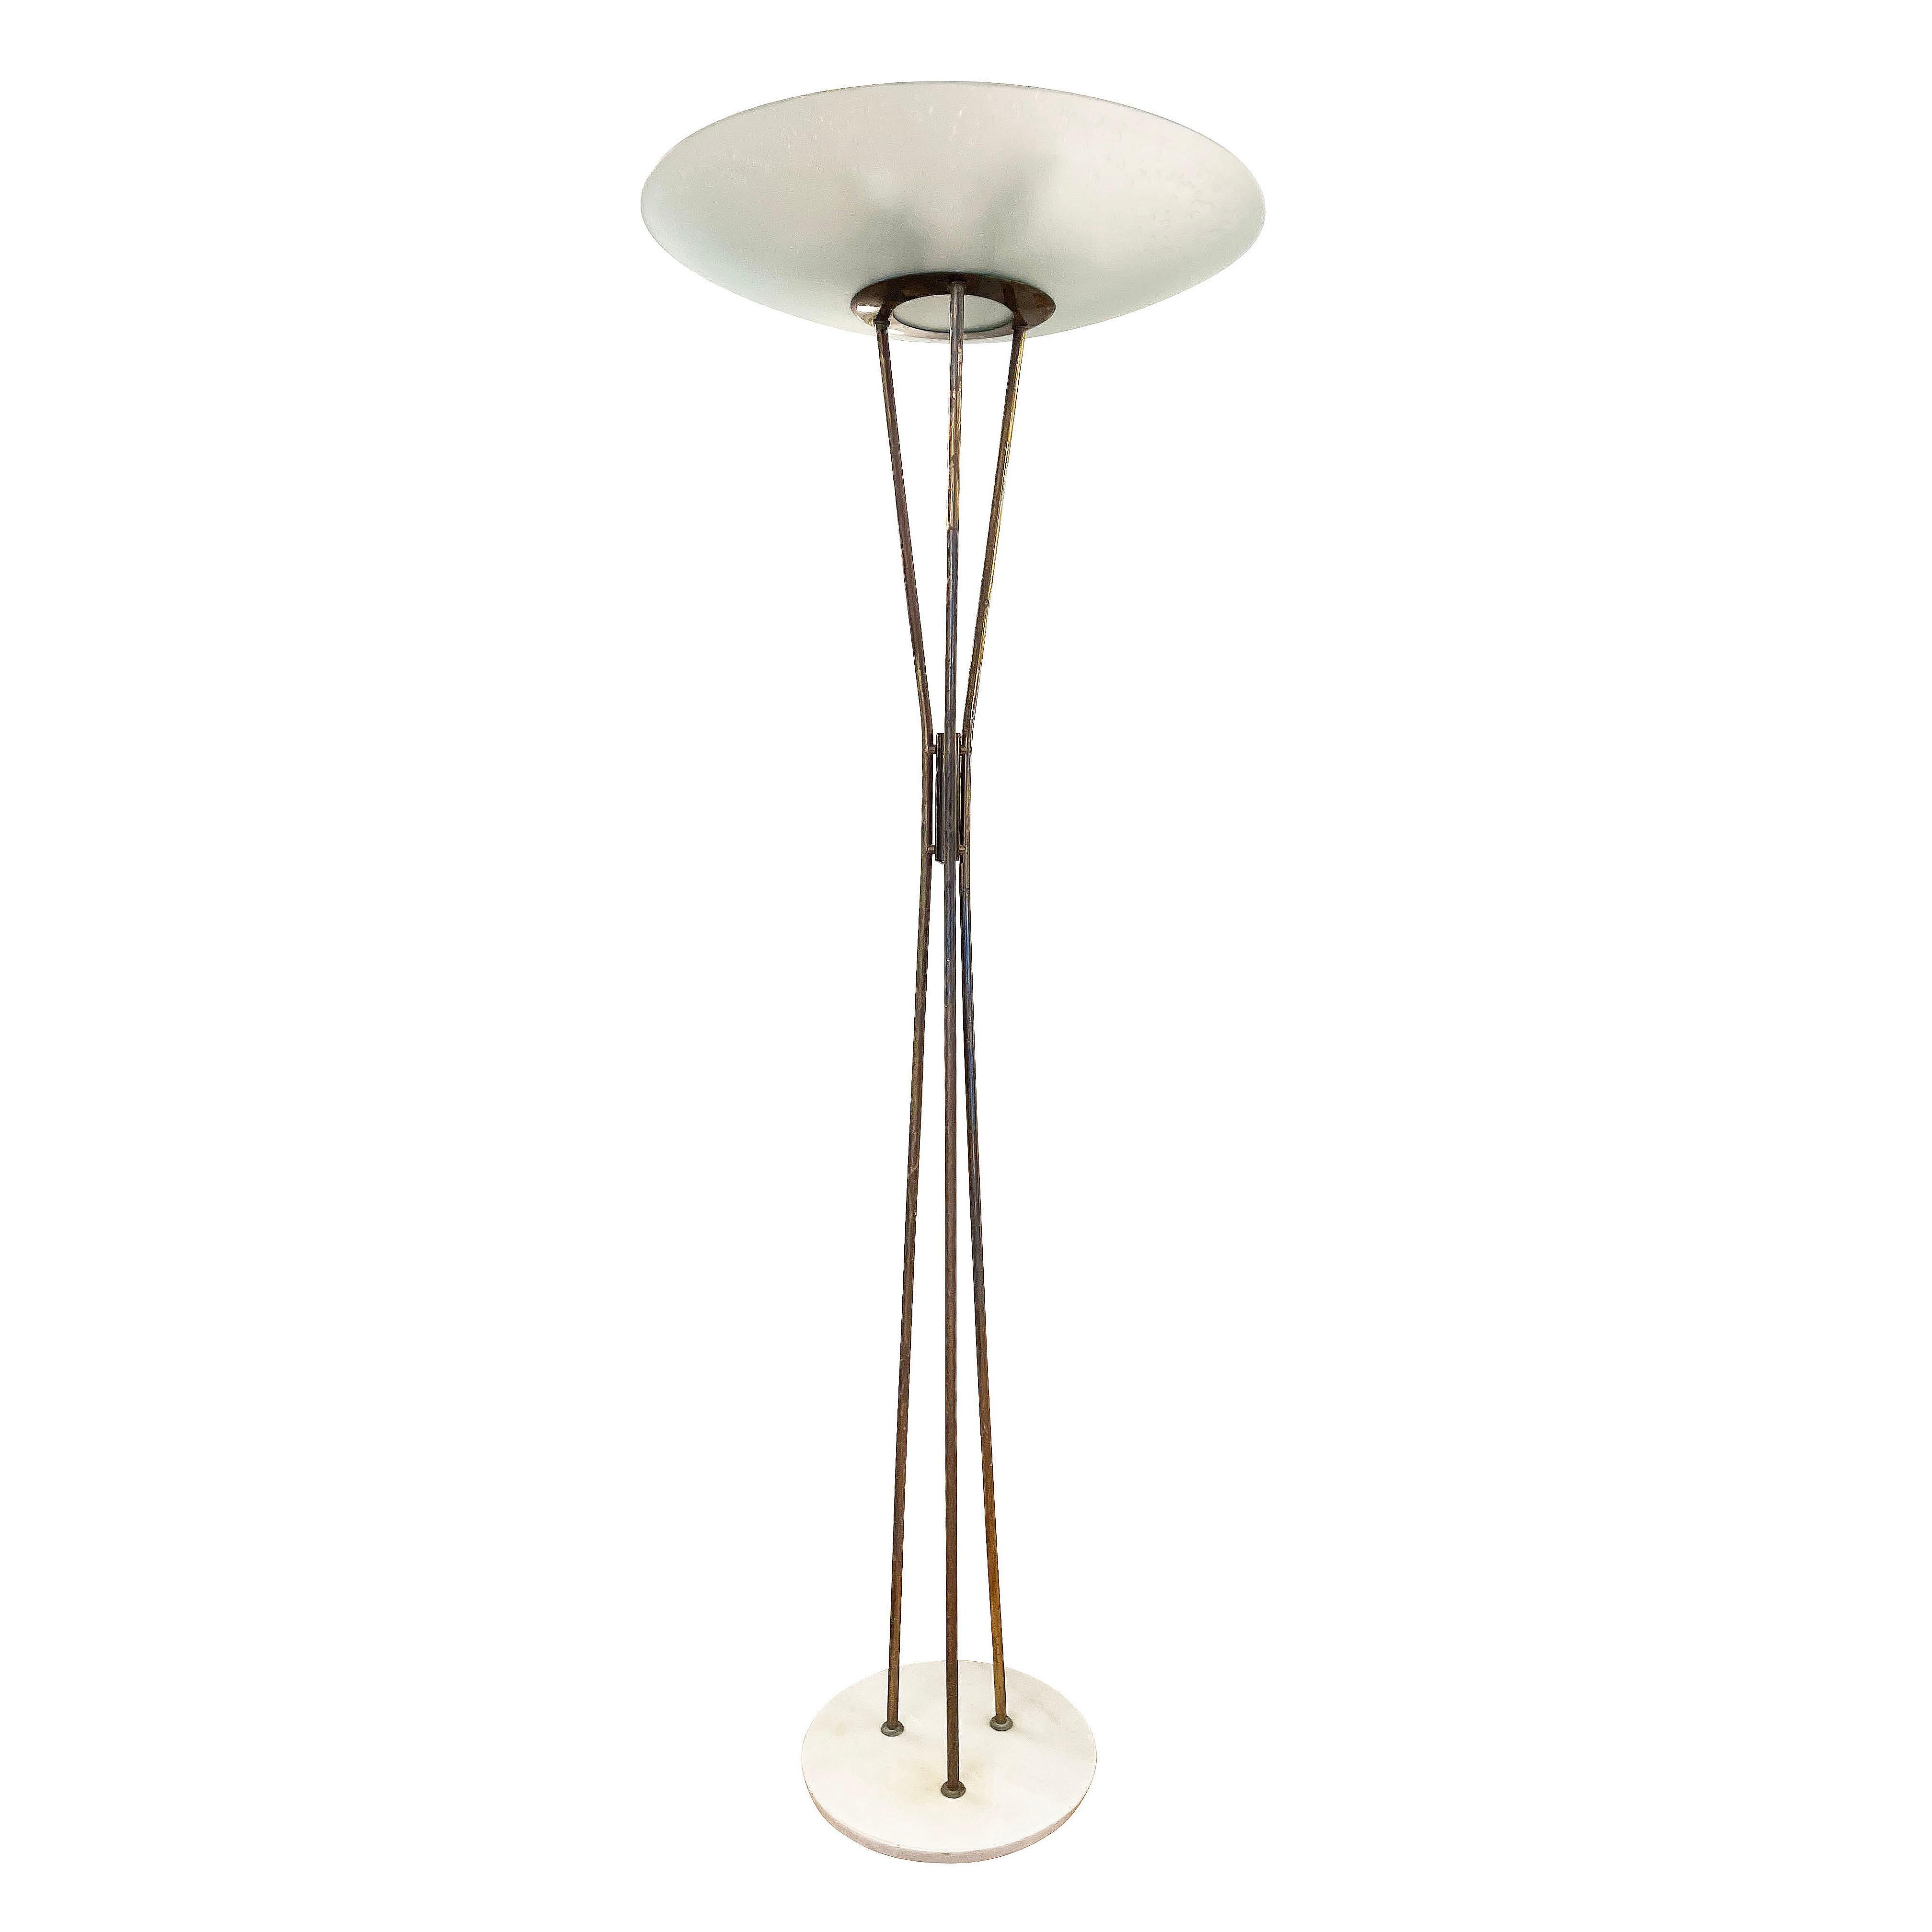 Rare Italian mid-century floor lamp by Stilnovo, marked with the original label. The hallmark of the piece is the textured glass shade concealing seven E26 base bulbs. The brass frame composed of three stems ends in a white marble